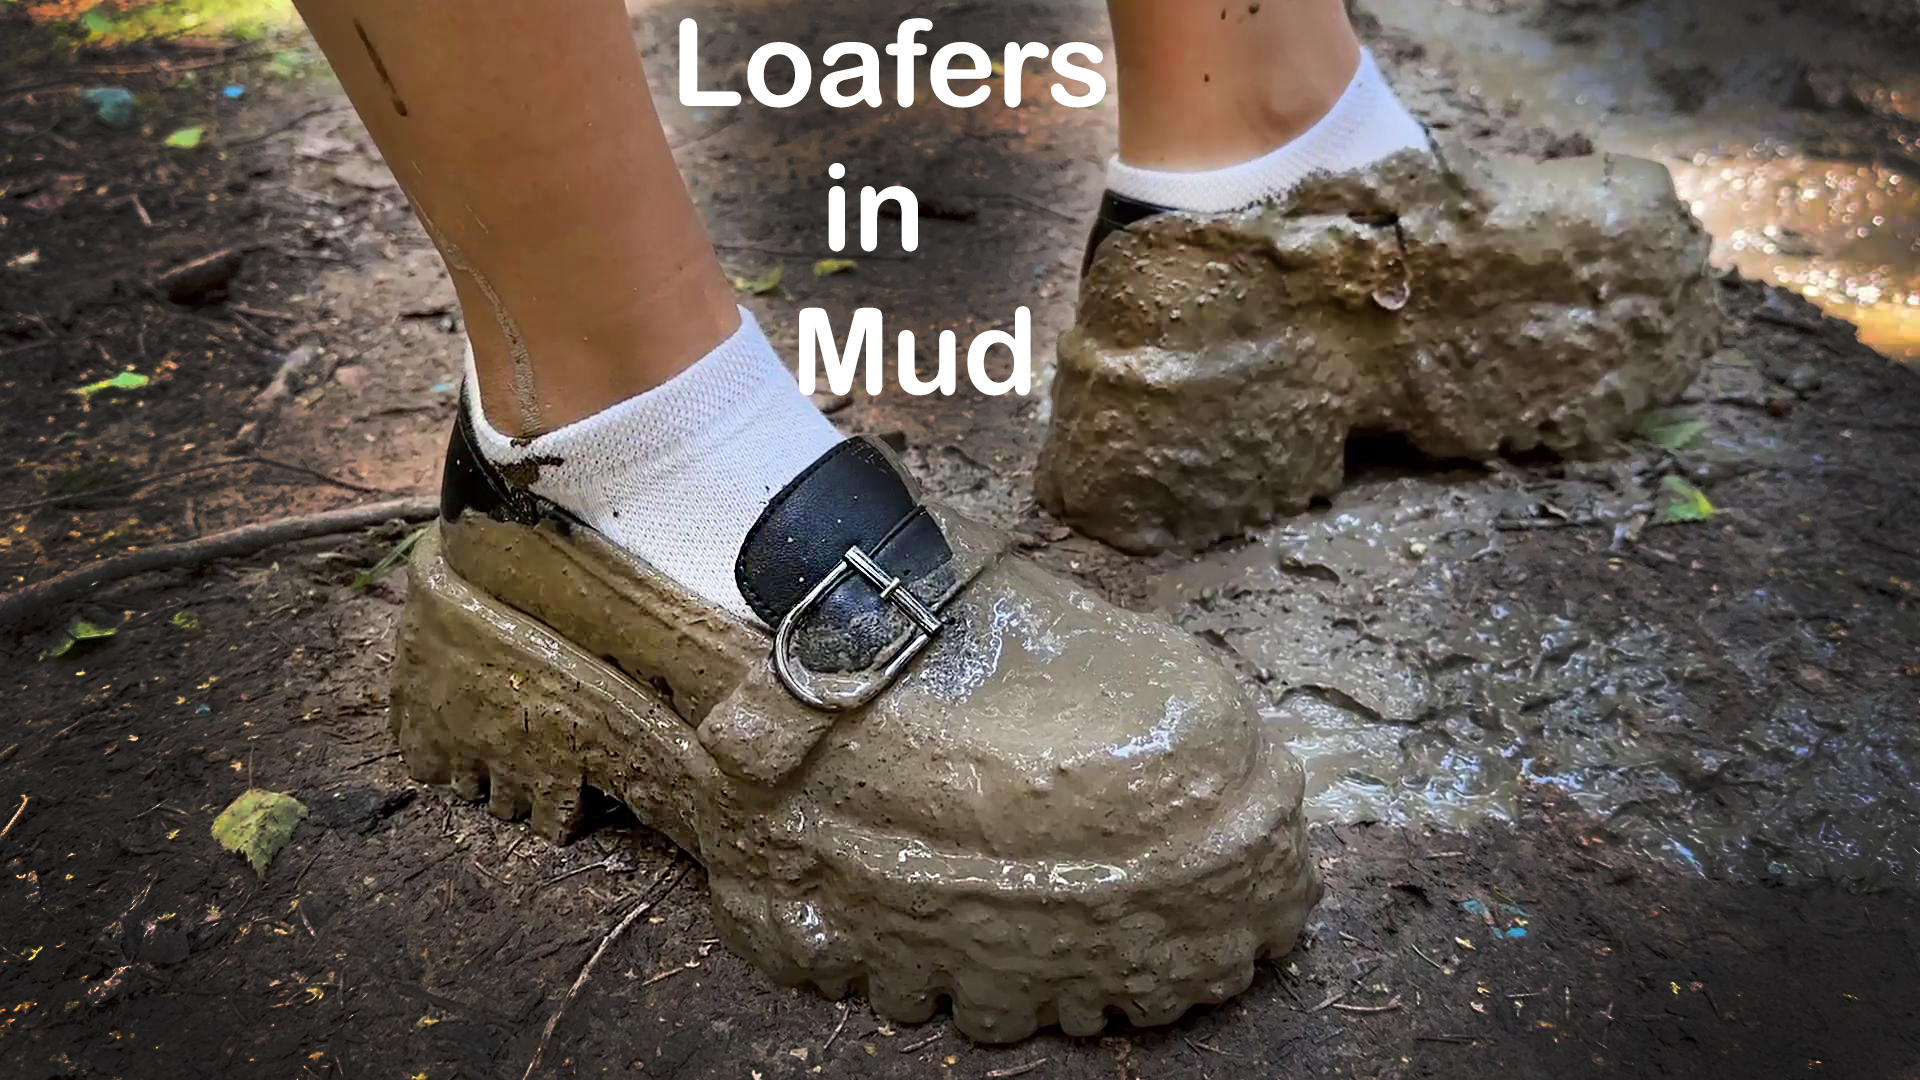 Platform Loafers in Mud, Shoes in Mud, Loafers in Mud, Platform Shoes ...